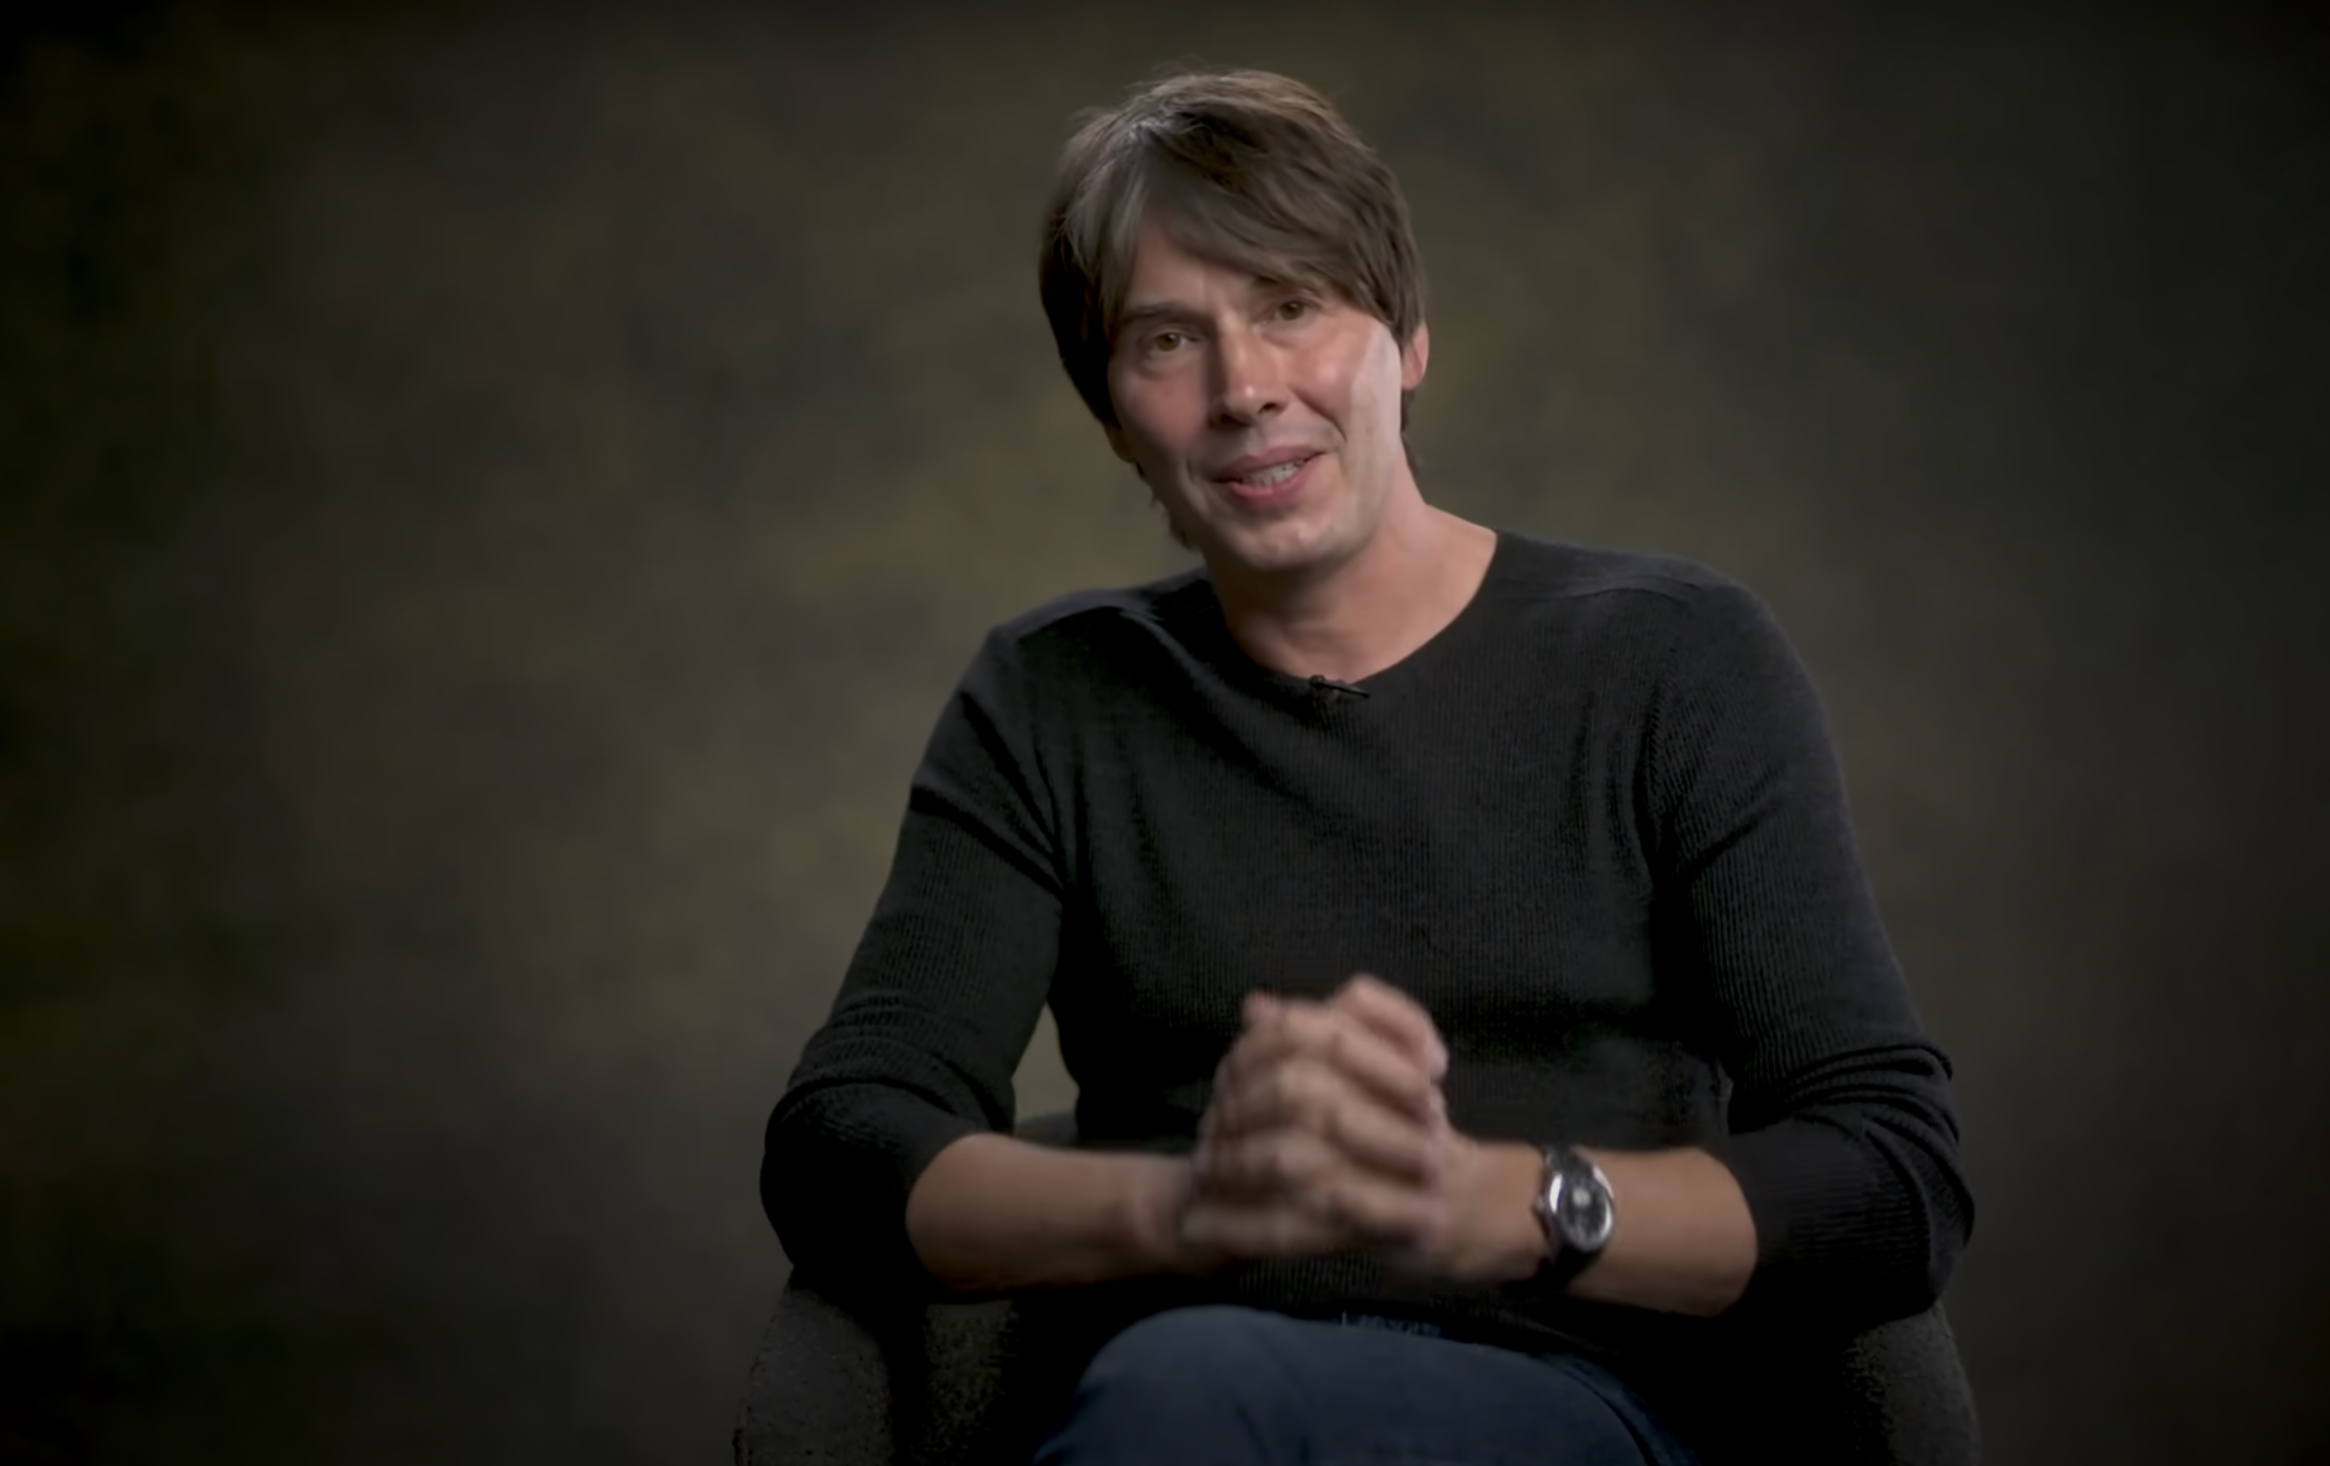 Professor Brian Cox Shuts Down Flat Earth Theory In Best Way Possible With Simple Response